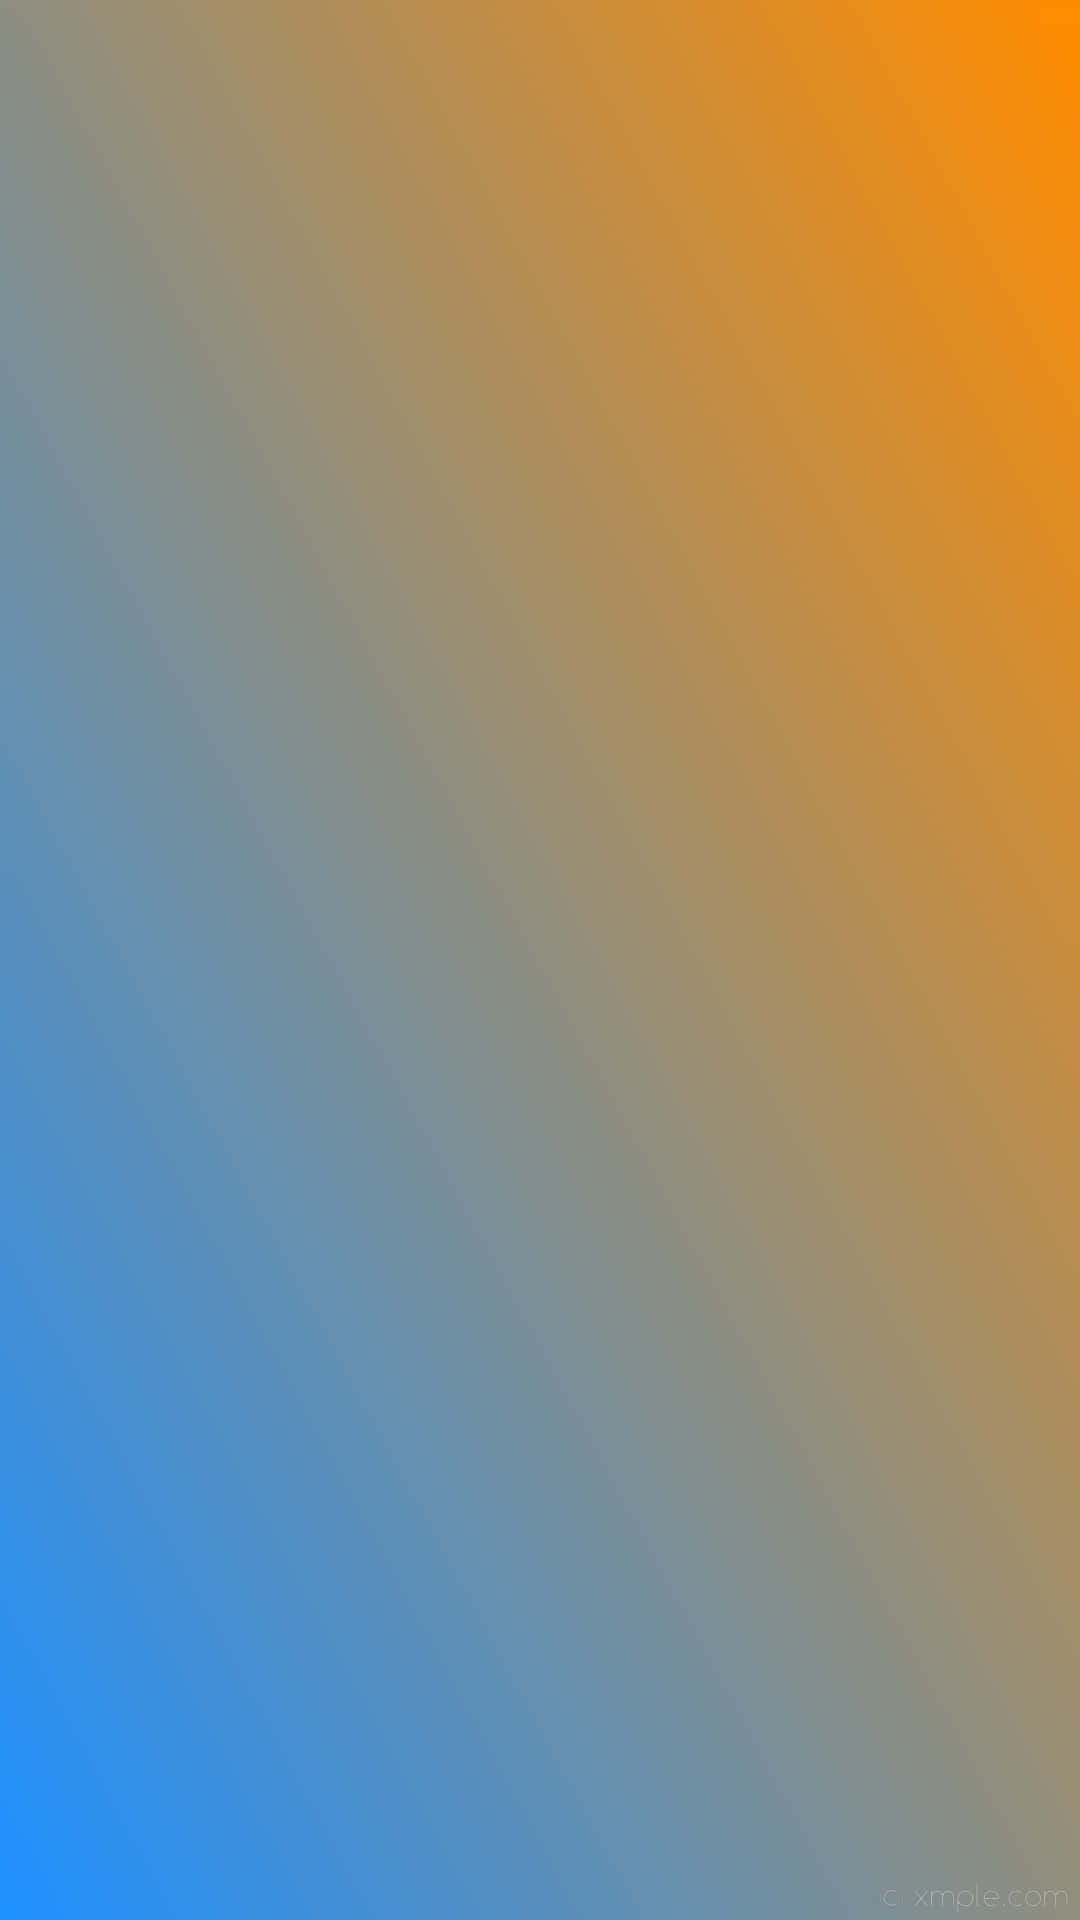 An Orange And Blue Background With A Blue And Orange Stripe Wallpaper